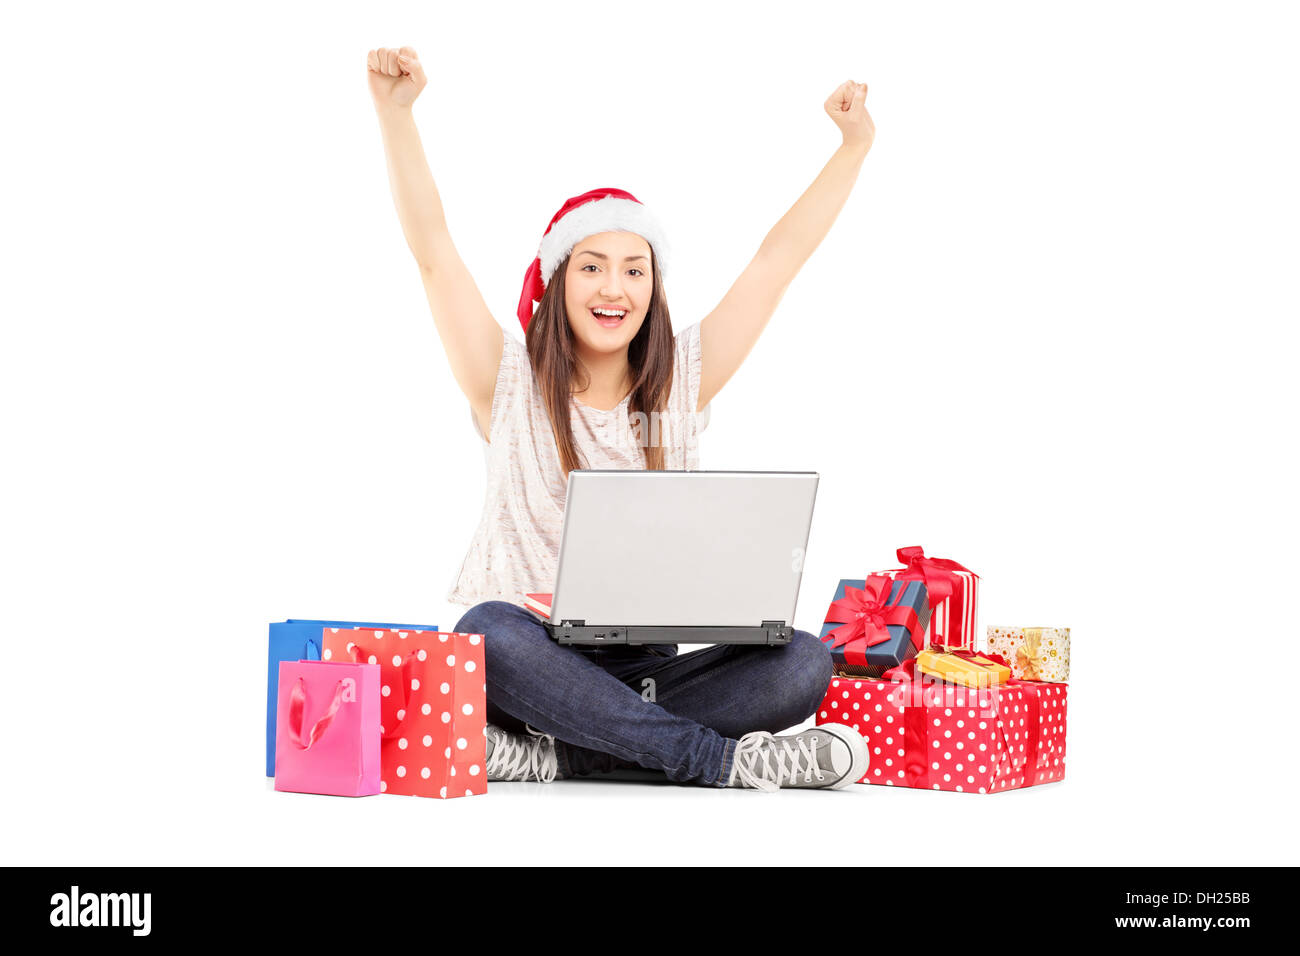 Excited young female with santa hat working on a laptop and gifts around her Stock Photo